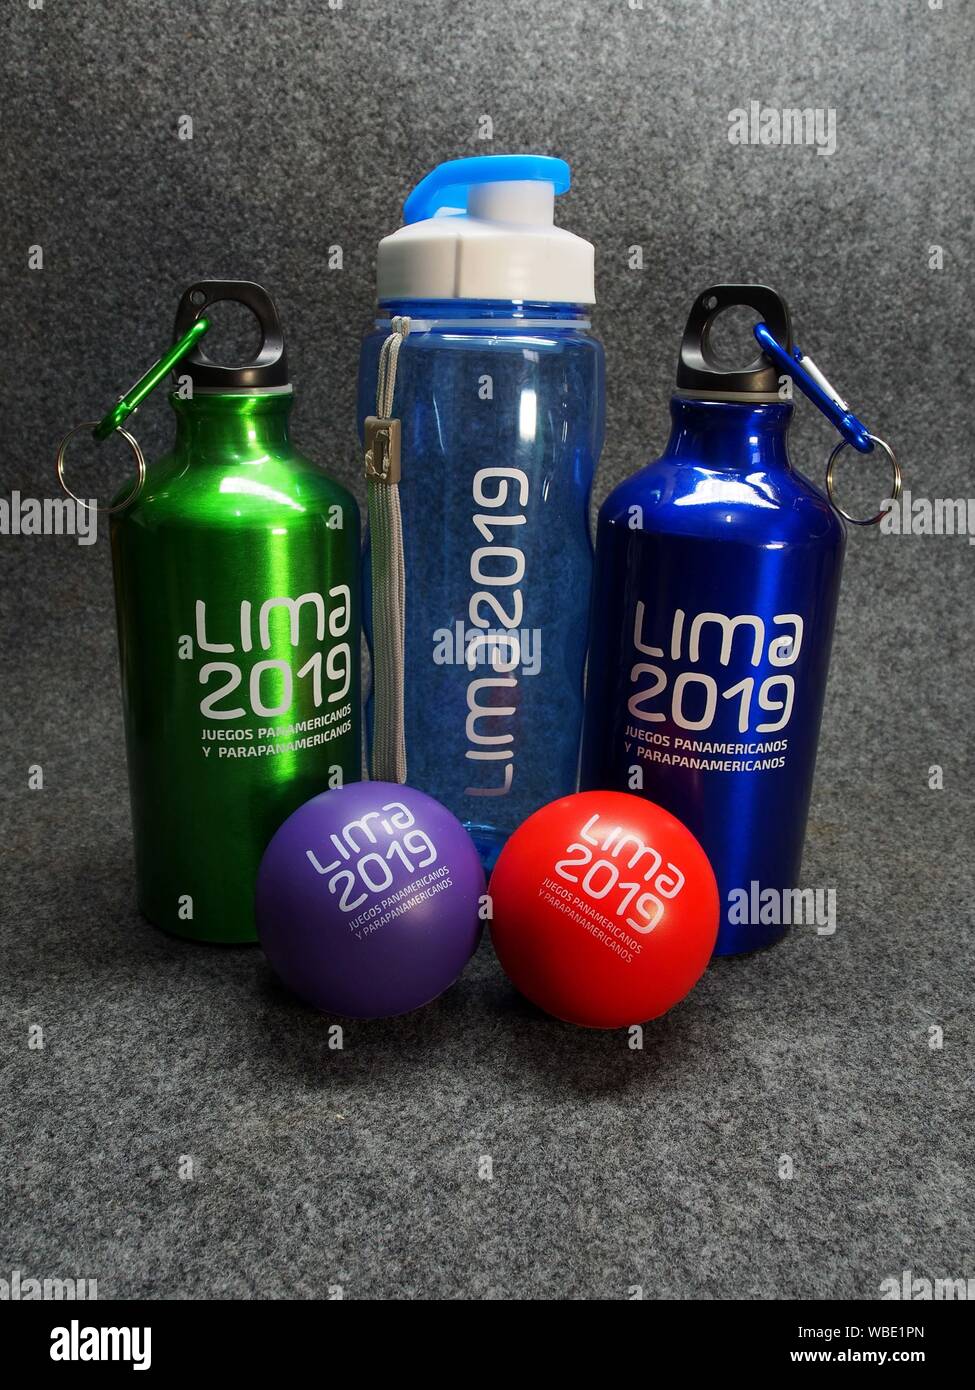 Bottles, and rubber balls, souvenirs of the   Lima 2019 Pan American and Parapan American Games Stock Photo